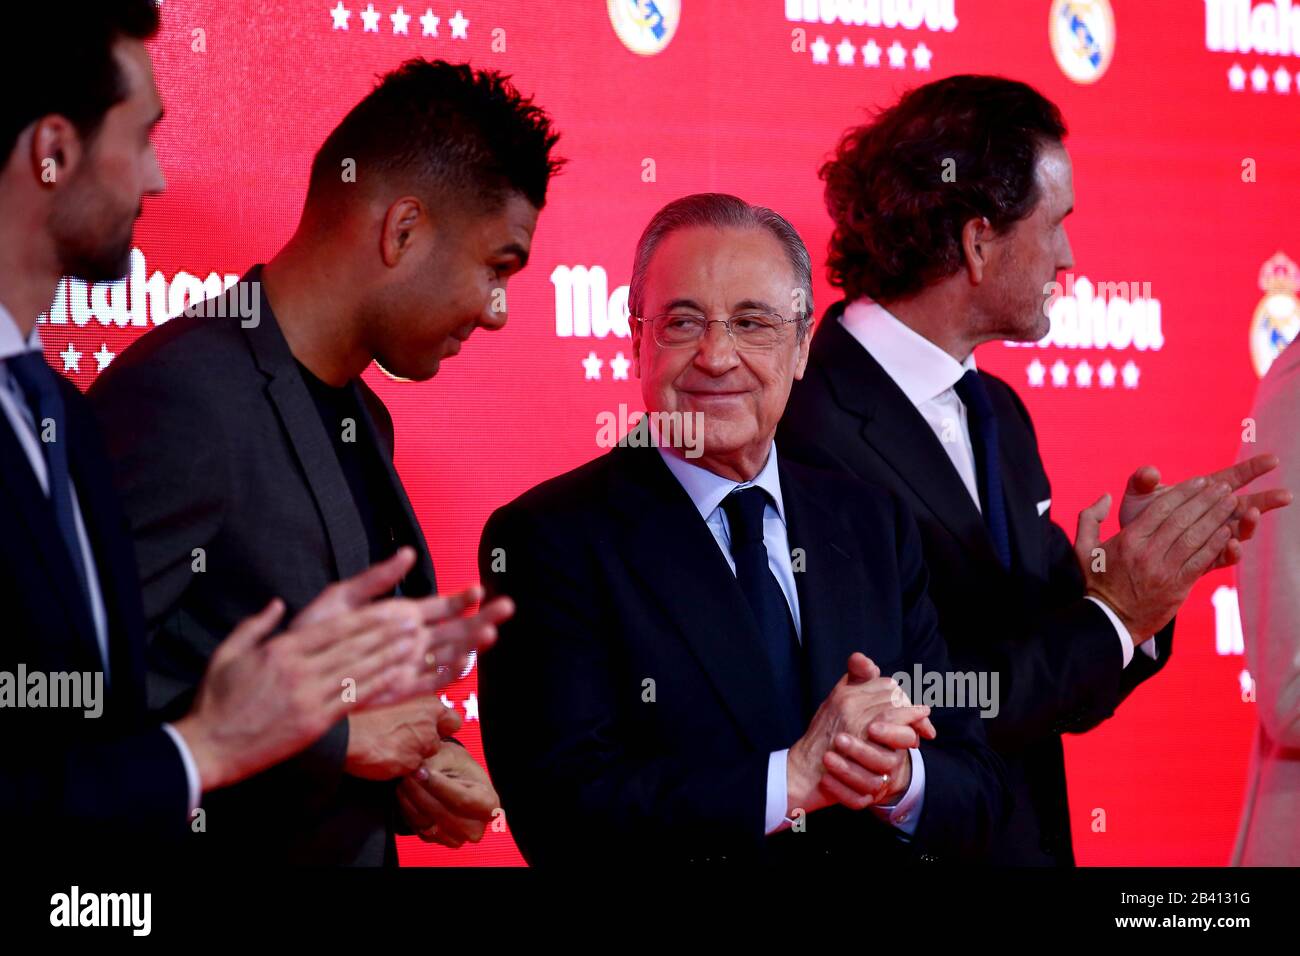 Madrid, Spain; 05/03/2020.- Florentino Pérez president of Real Madrid accompanied by Casemiro (L), Valverde and former club player and ambassador Álvaro Arbeloa presented a new sponsorship agreement with a Madrid company at the Santiago Bernabéu stadium. Florentino Pérez said “we enter the decisive phase of the season, in which the strength of Real Madrid will continue to be vital to achieve every challenge, even those that may seem impossible,” to add that “in football we have already achieved the Spanish Super Cup and, in basketball, also the Spanish Super Cup and the Copa del Rey. Three ti Stock Photo